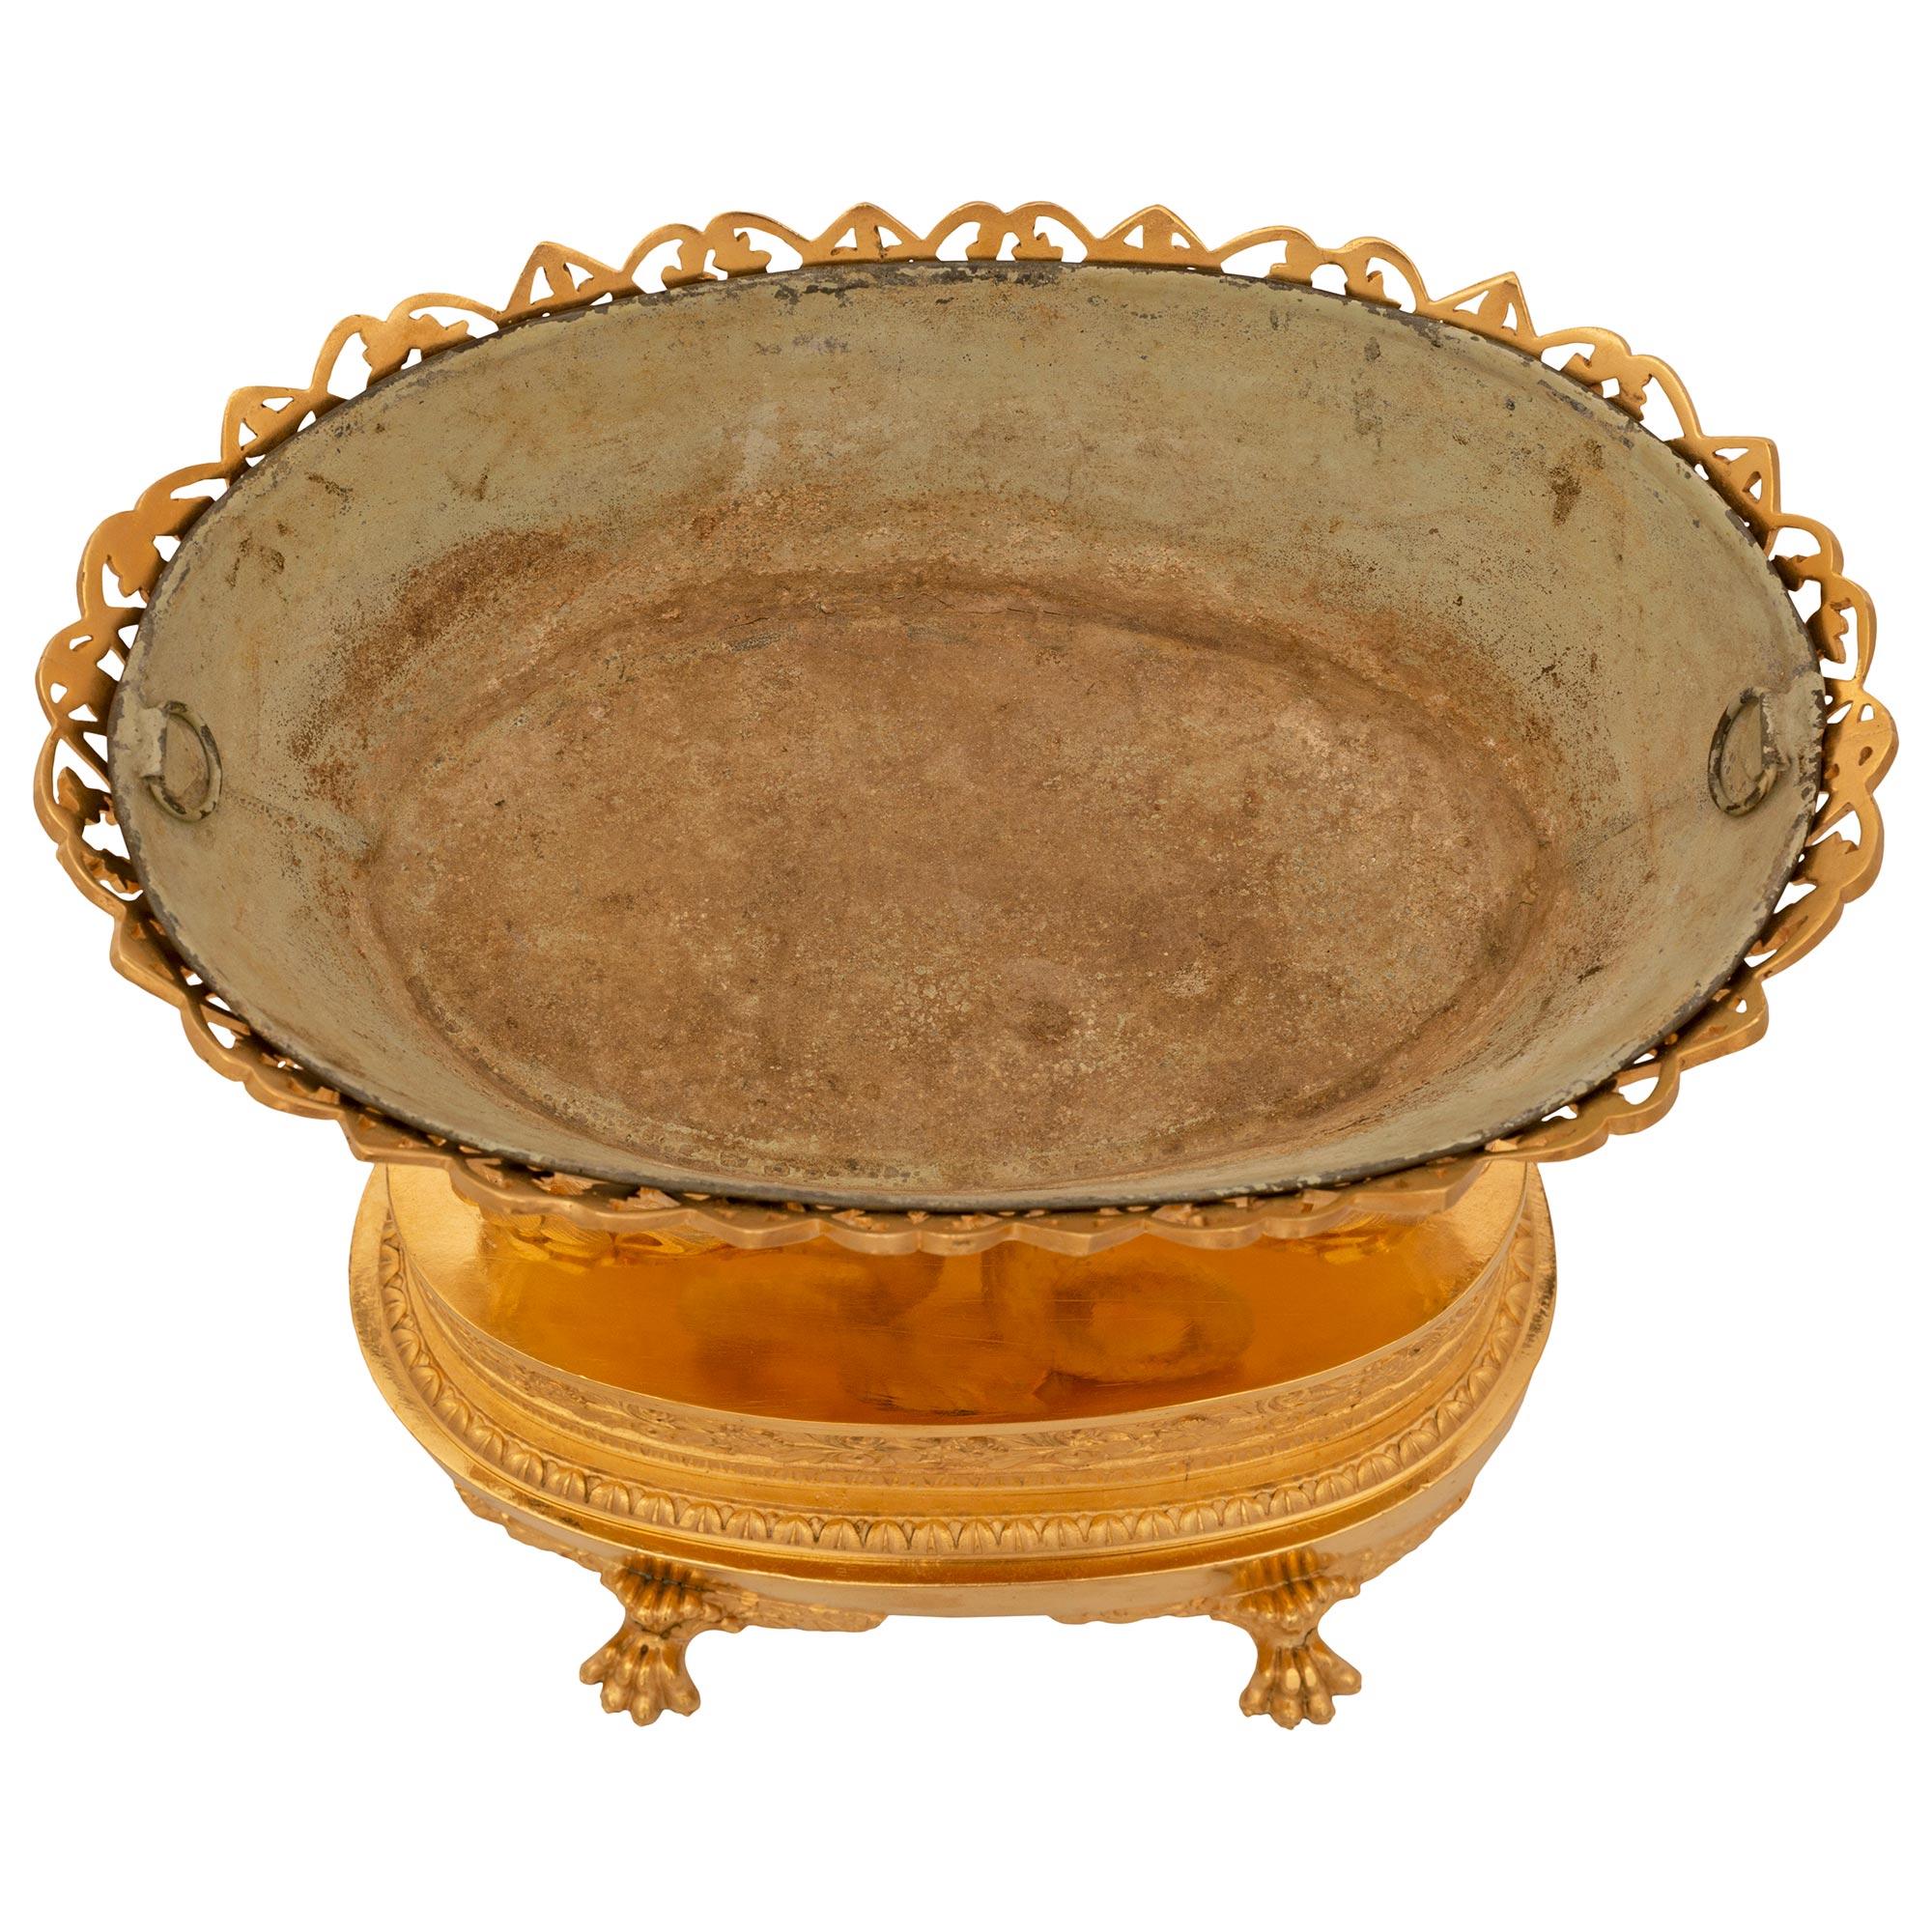 An exceptional and very high quality French 19th century 1st Empire period ormolu centerpiece. The oblong shaped centerpiece is raised by handsome paw feet amidst scrolled foliate designs below a most decorative mottled wrap around Coeur de Rai band